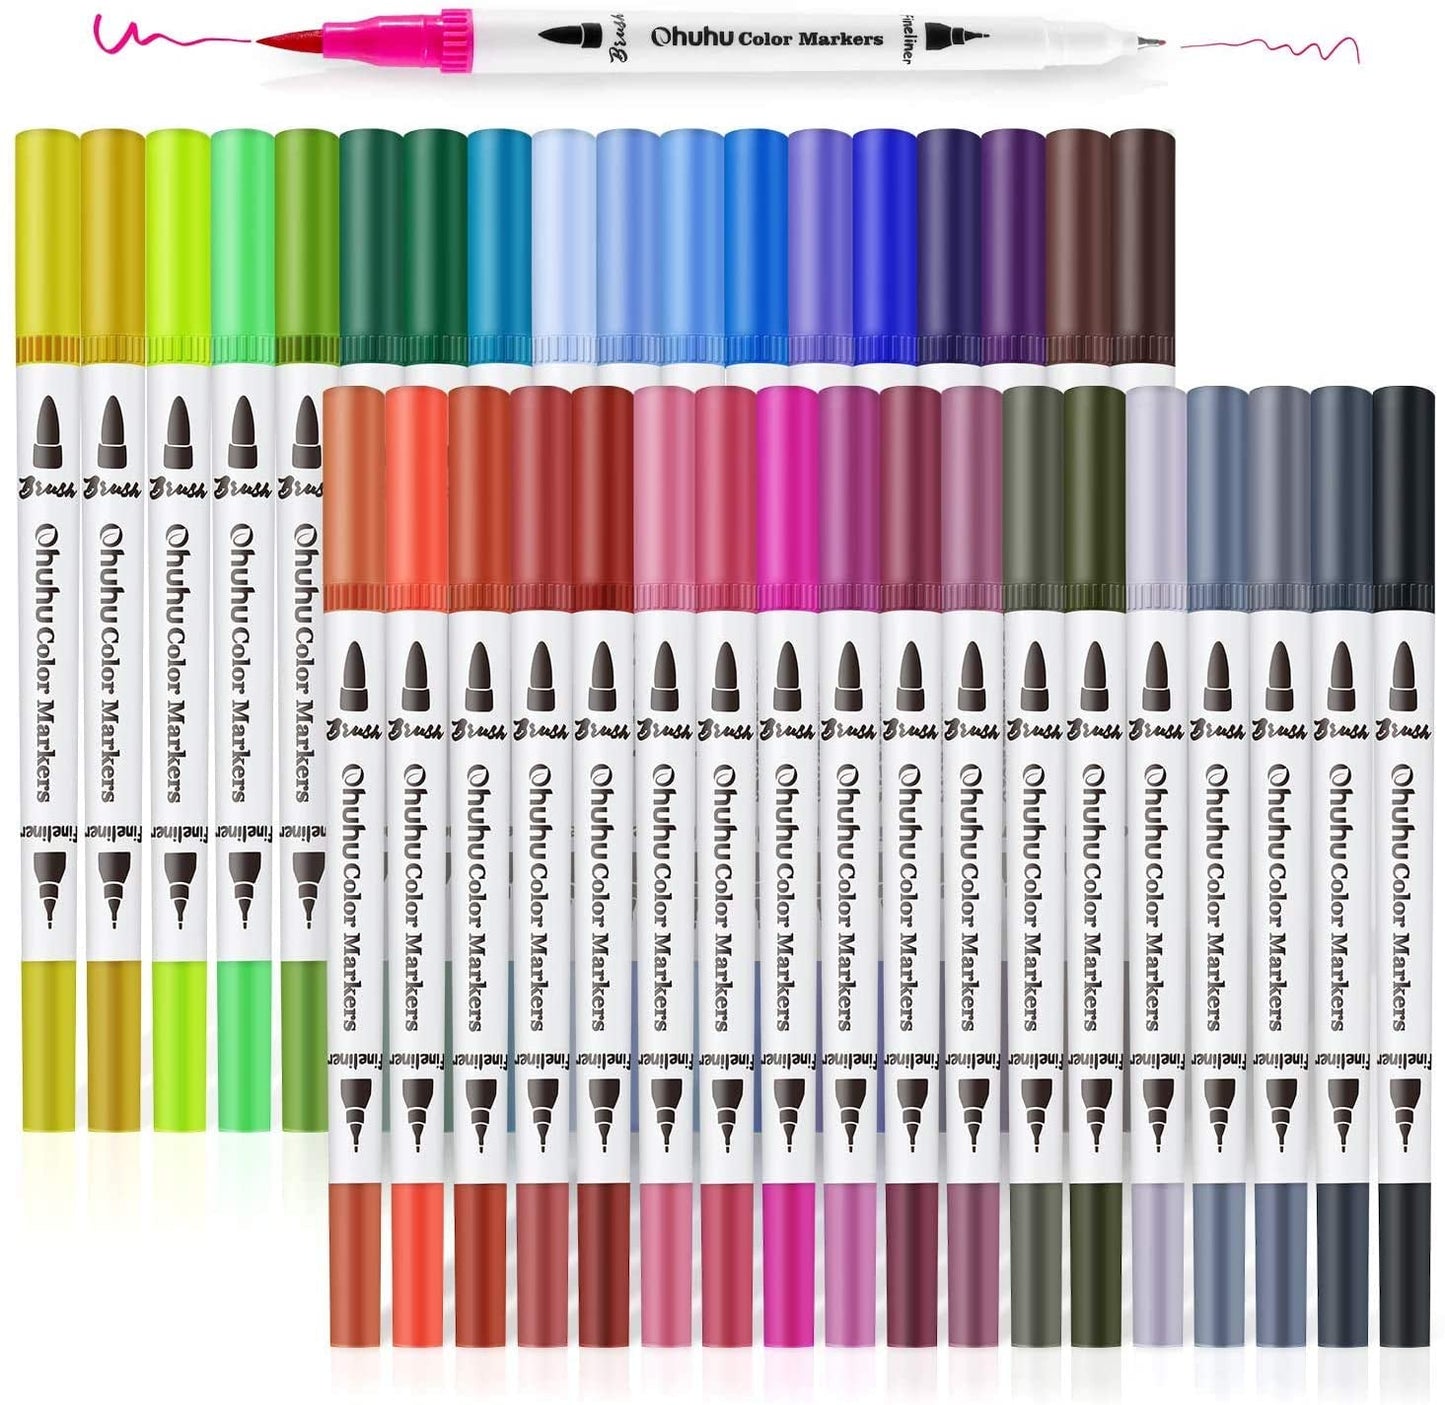 Ohuhu Maui Series 36 Colors Water Based Dual Tipped Brush Markers for Calligraphy and Drawing for Kids and Adults (Brush and Fineliner) Y30-80400-18